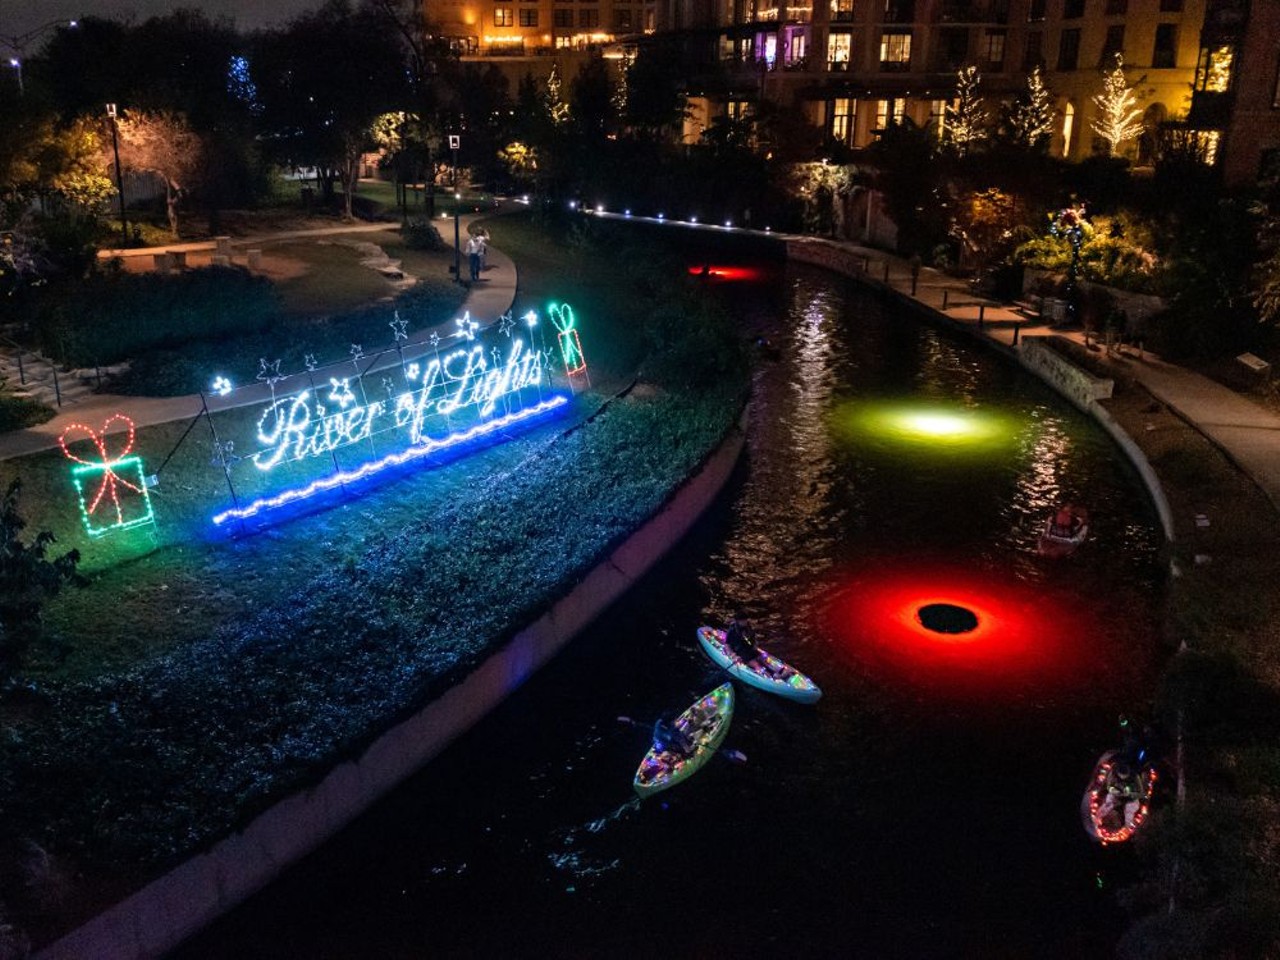 Kayak the illuminated San Antonio River
If you're feeling outdoorsy, partake in the recently-established holiday tradition of Holly Jolly Kayaking, where attendees can view the Museum Reach's River of Lights display from the water. This year, the event takes place on Dec. 2 and it’s $15 to reserve a kayak, or free if you bring your own.